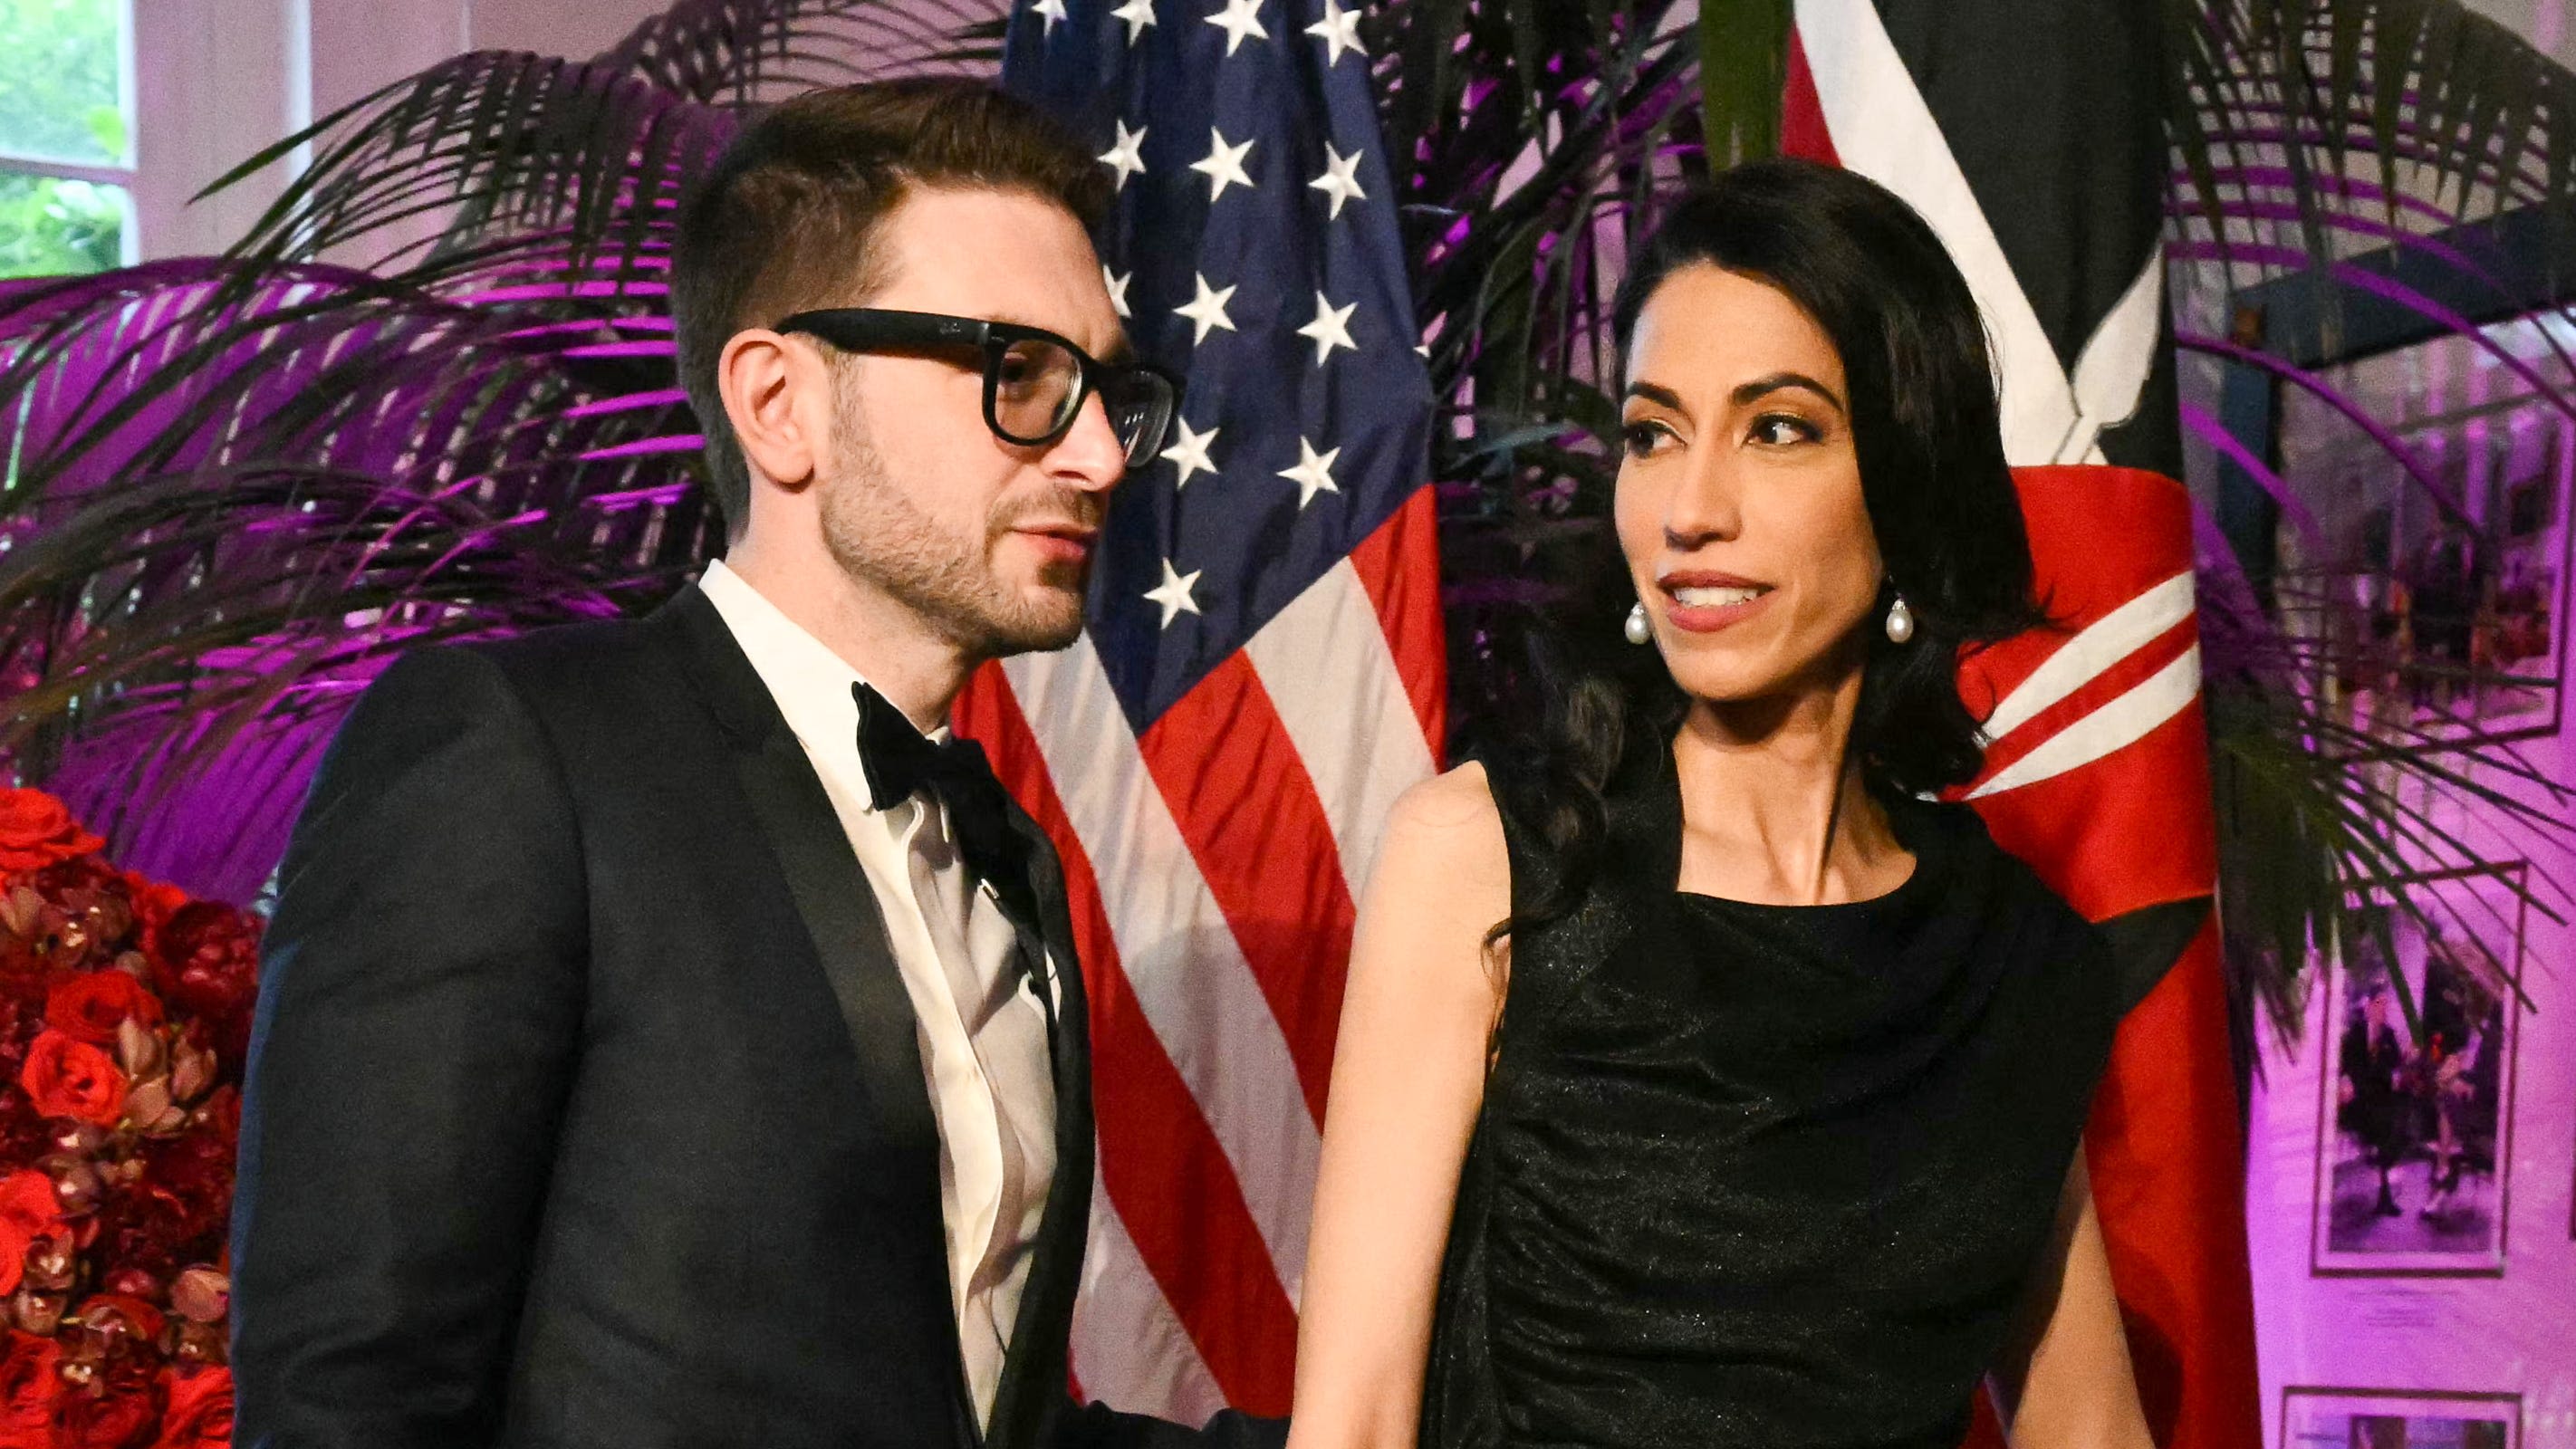 Huma Abedin and Alex Soros are engaged: 'Couldn't be happier'